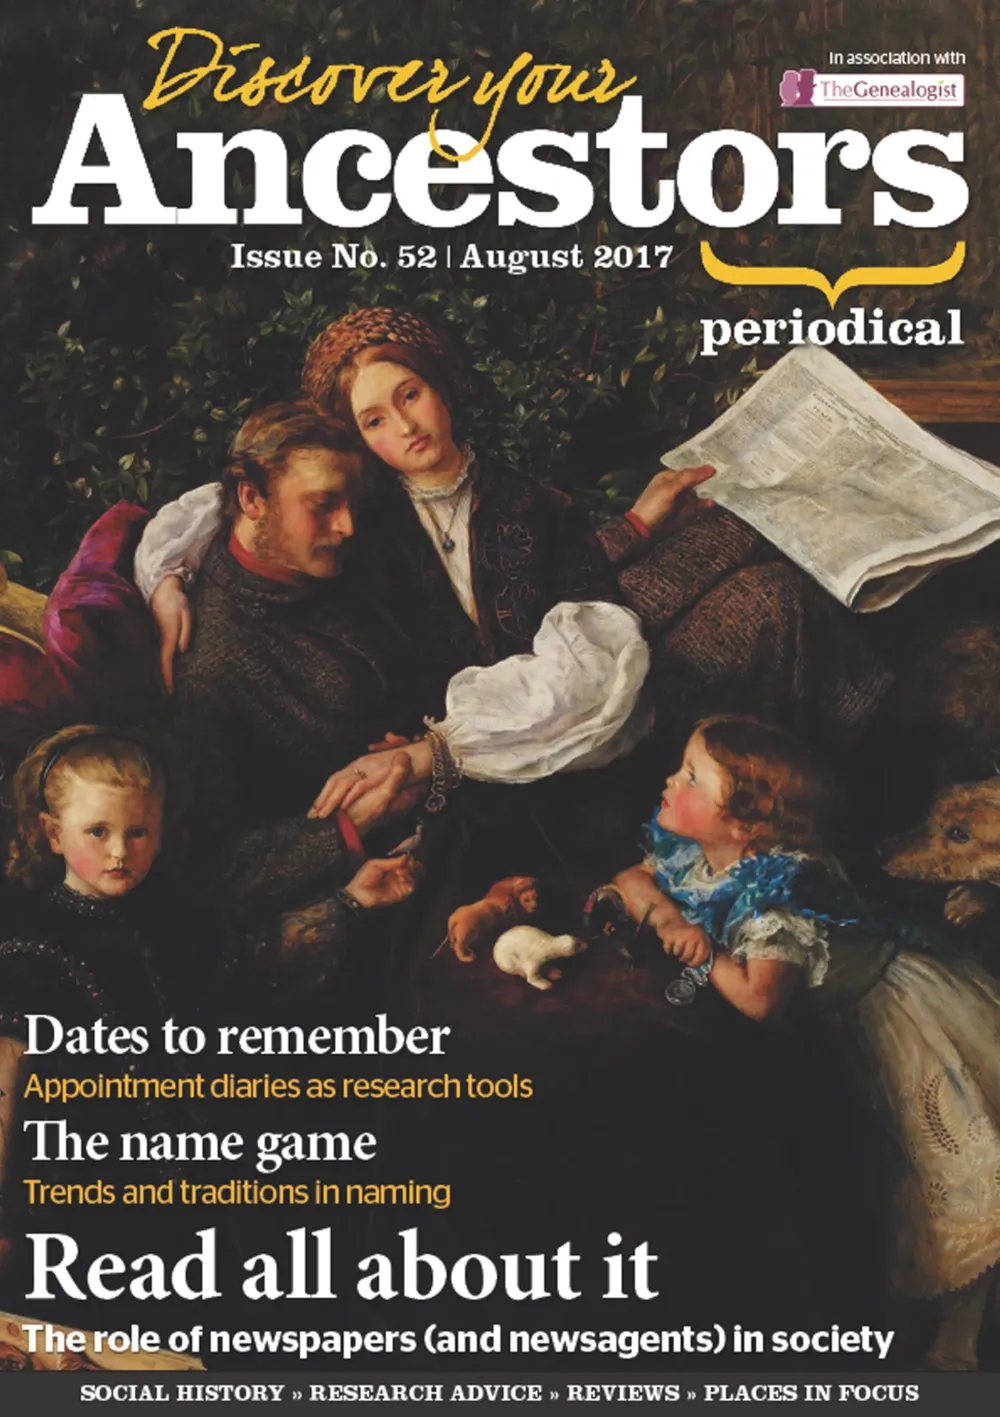 Discover Your Ancestors Periodical - August 2017